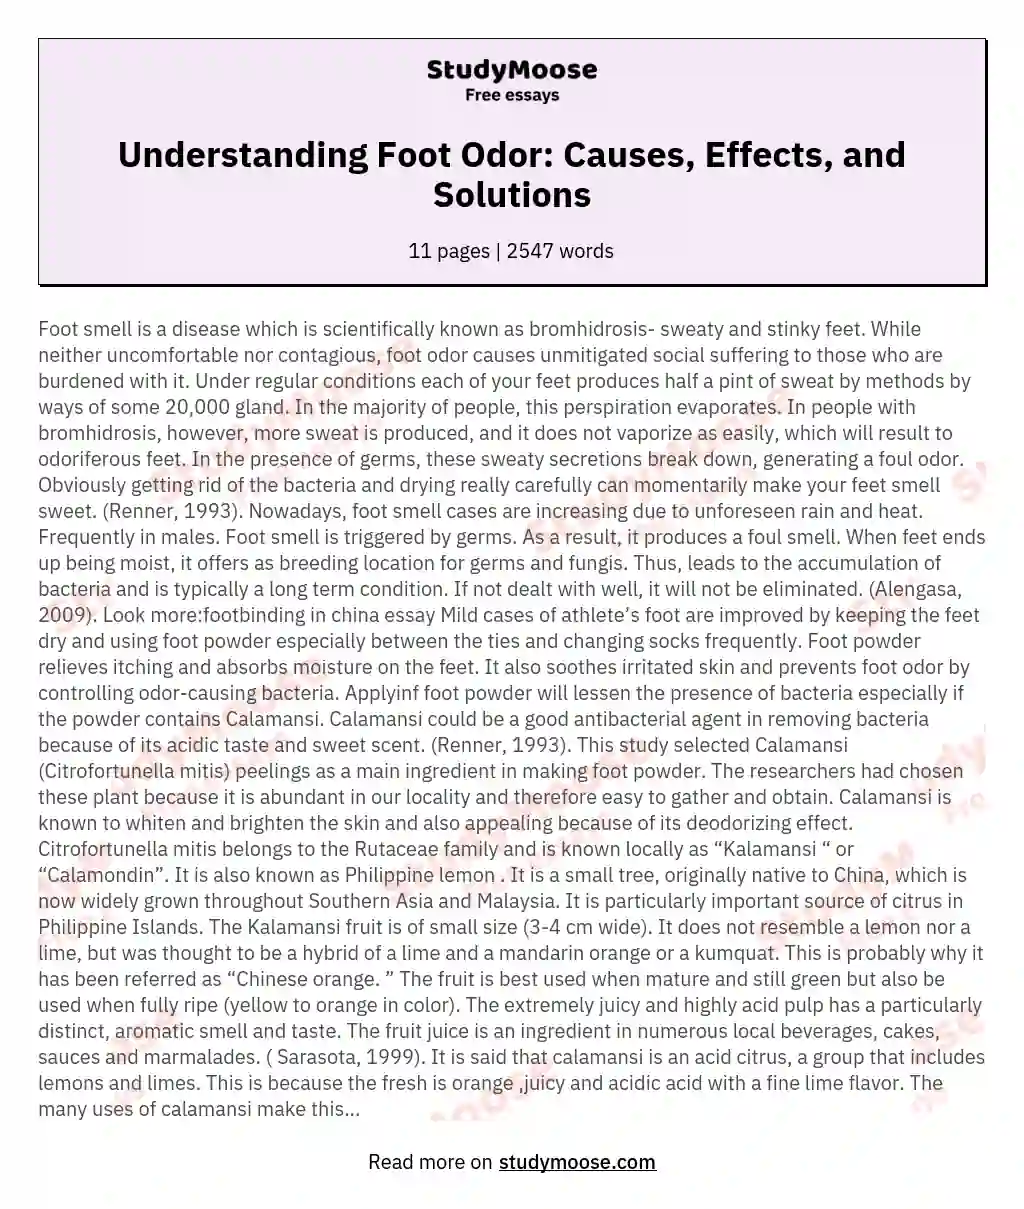 Understanding Foot Odor: Causes, Effects, and Solutions essay